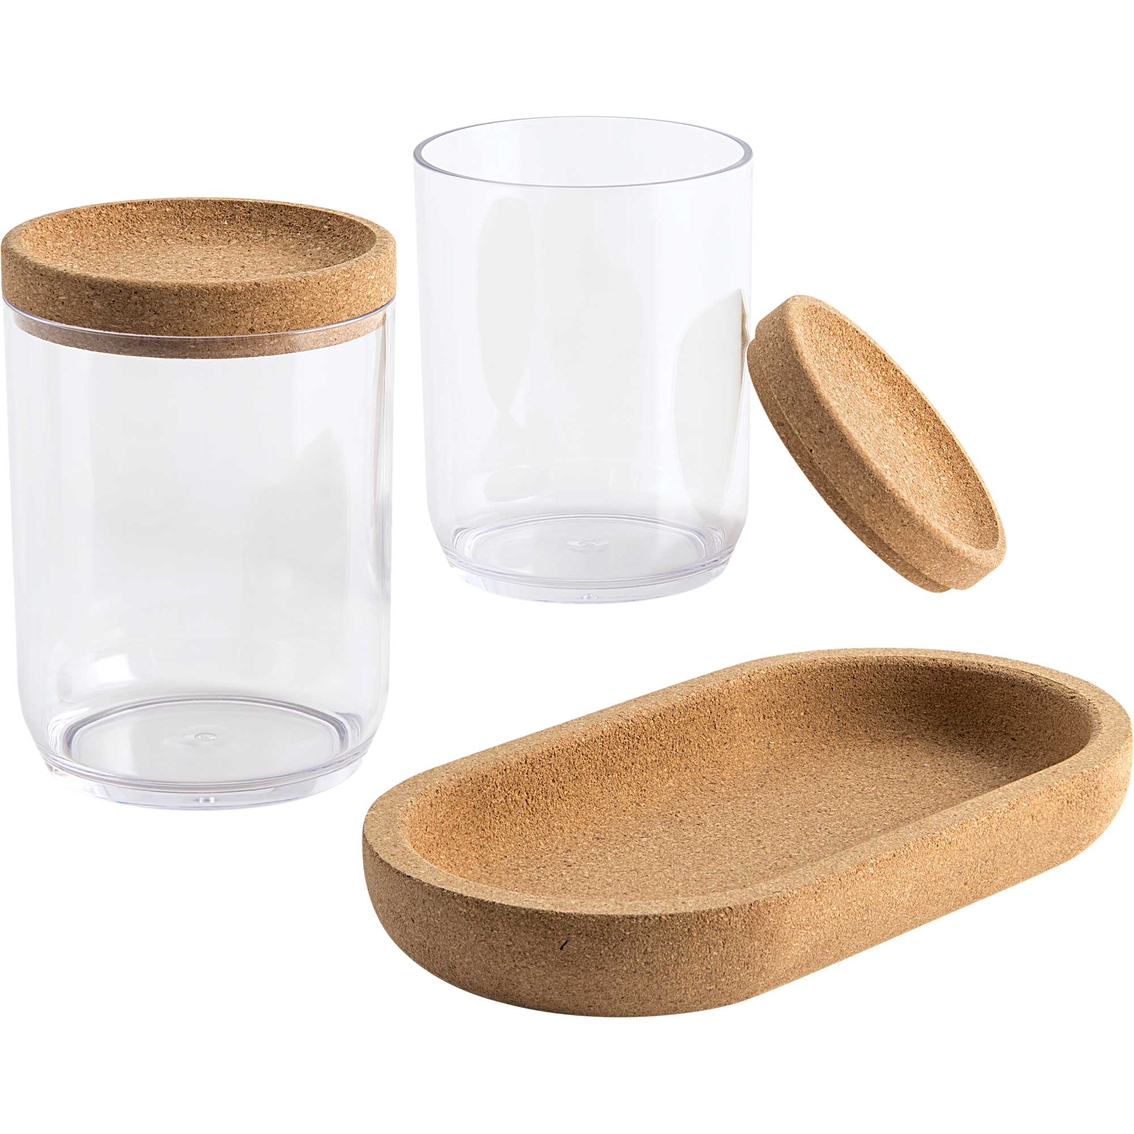 Allure Canister Set with Cork Tray - Image 2 of 3